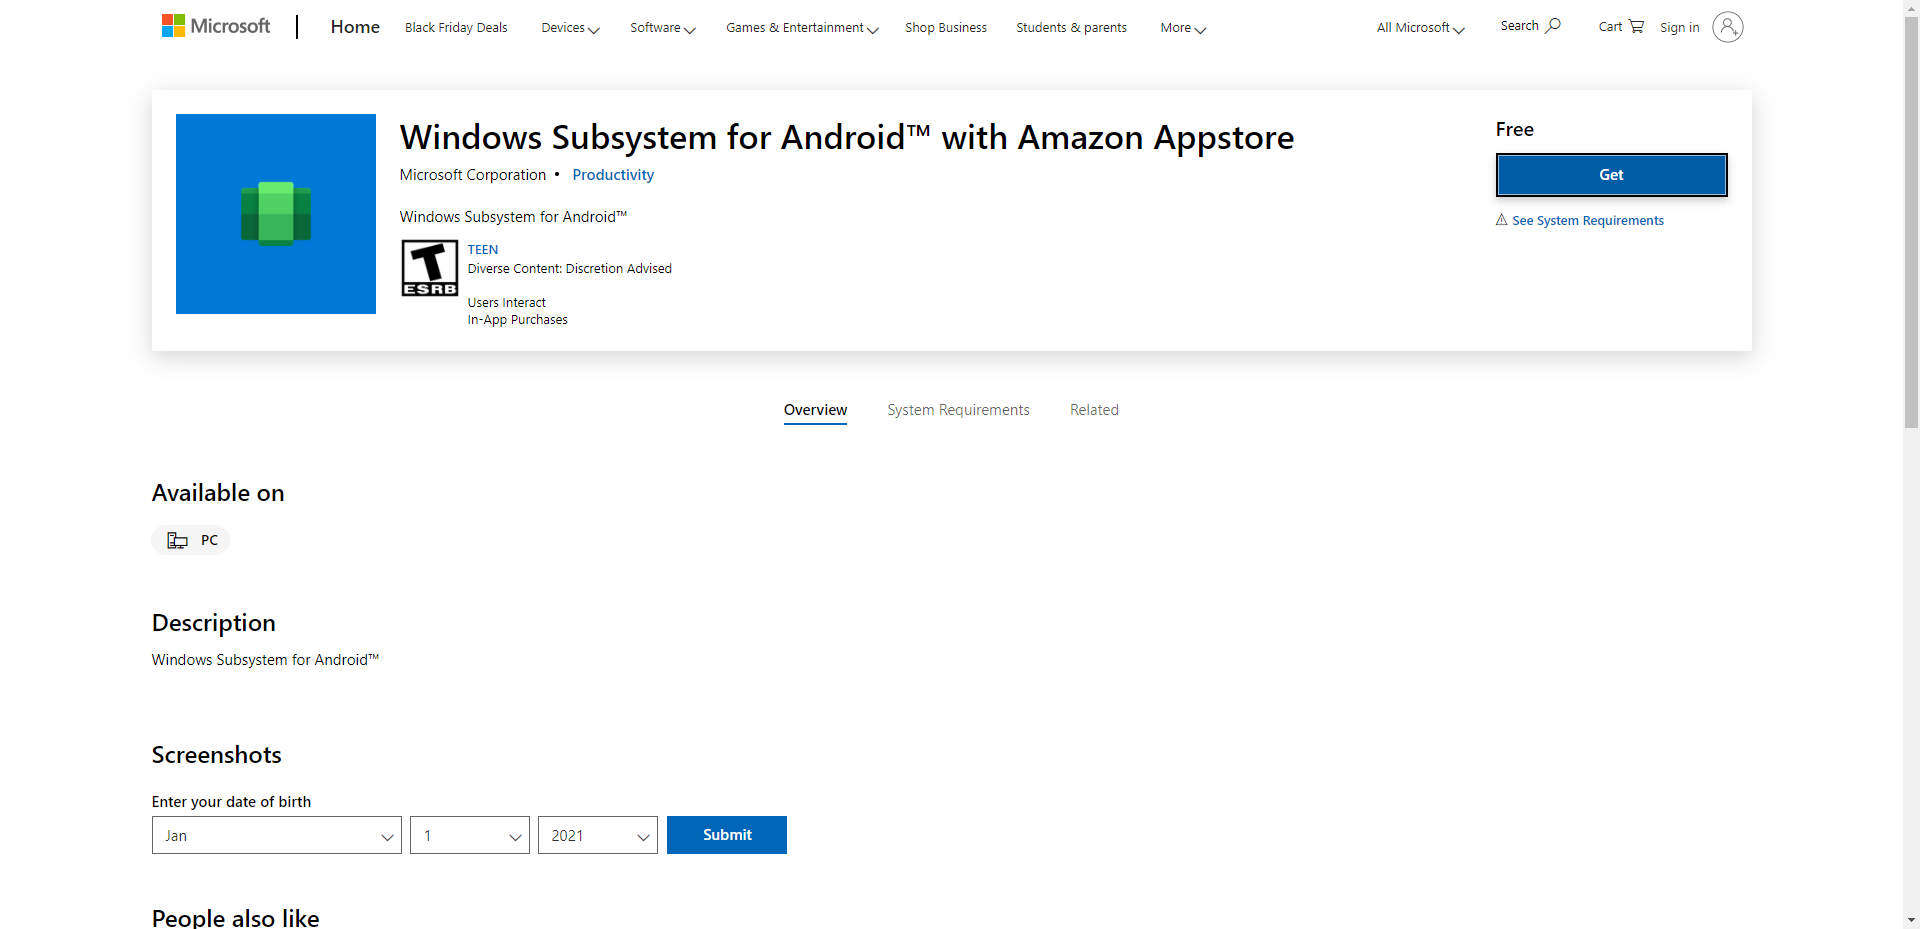 Windows Subsystem for Android™ with Amazon Appstore